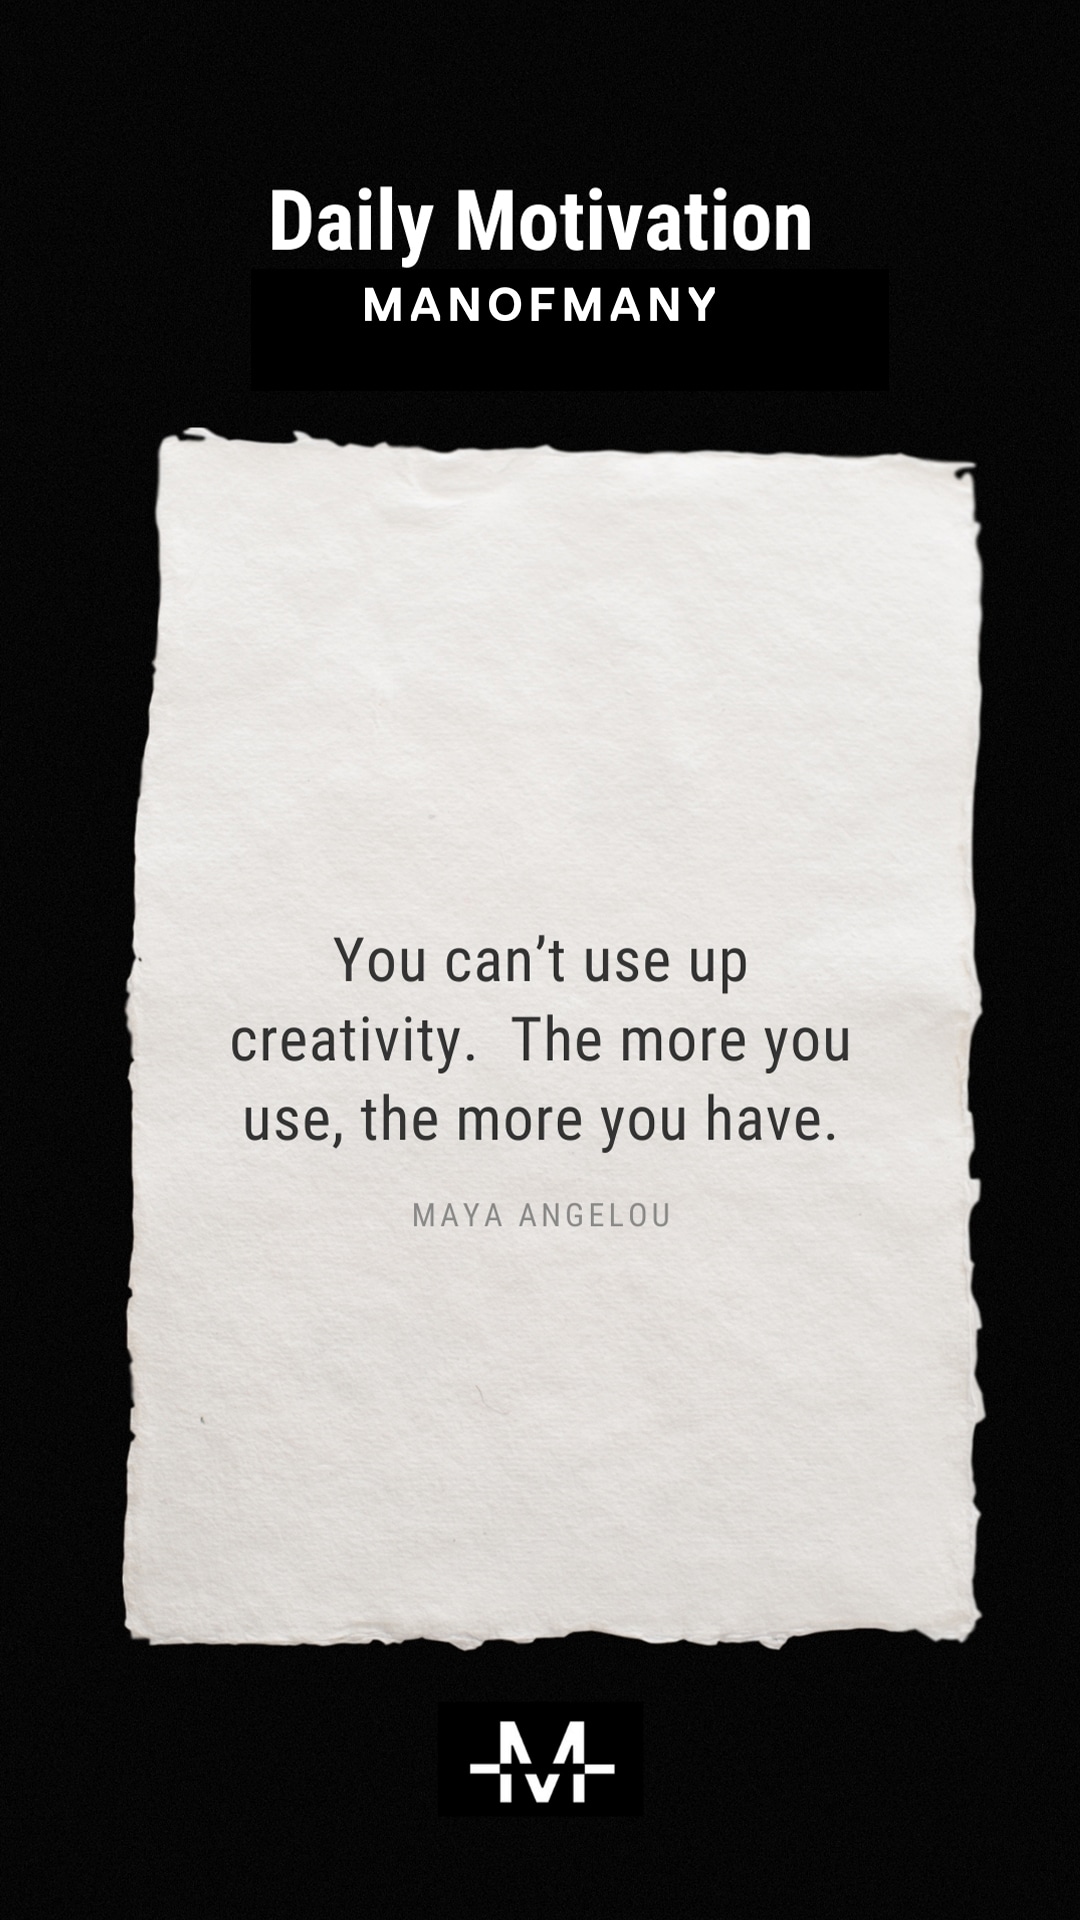 You can’t use up creativity. The more you use, the more you have. –Maya Angelou quote